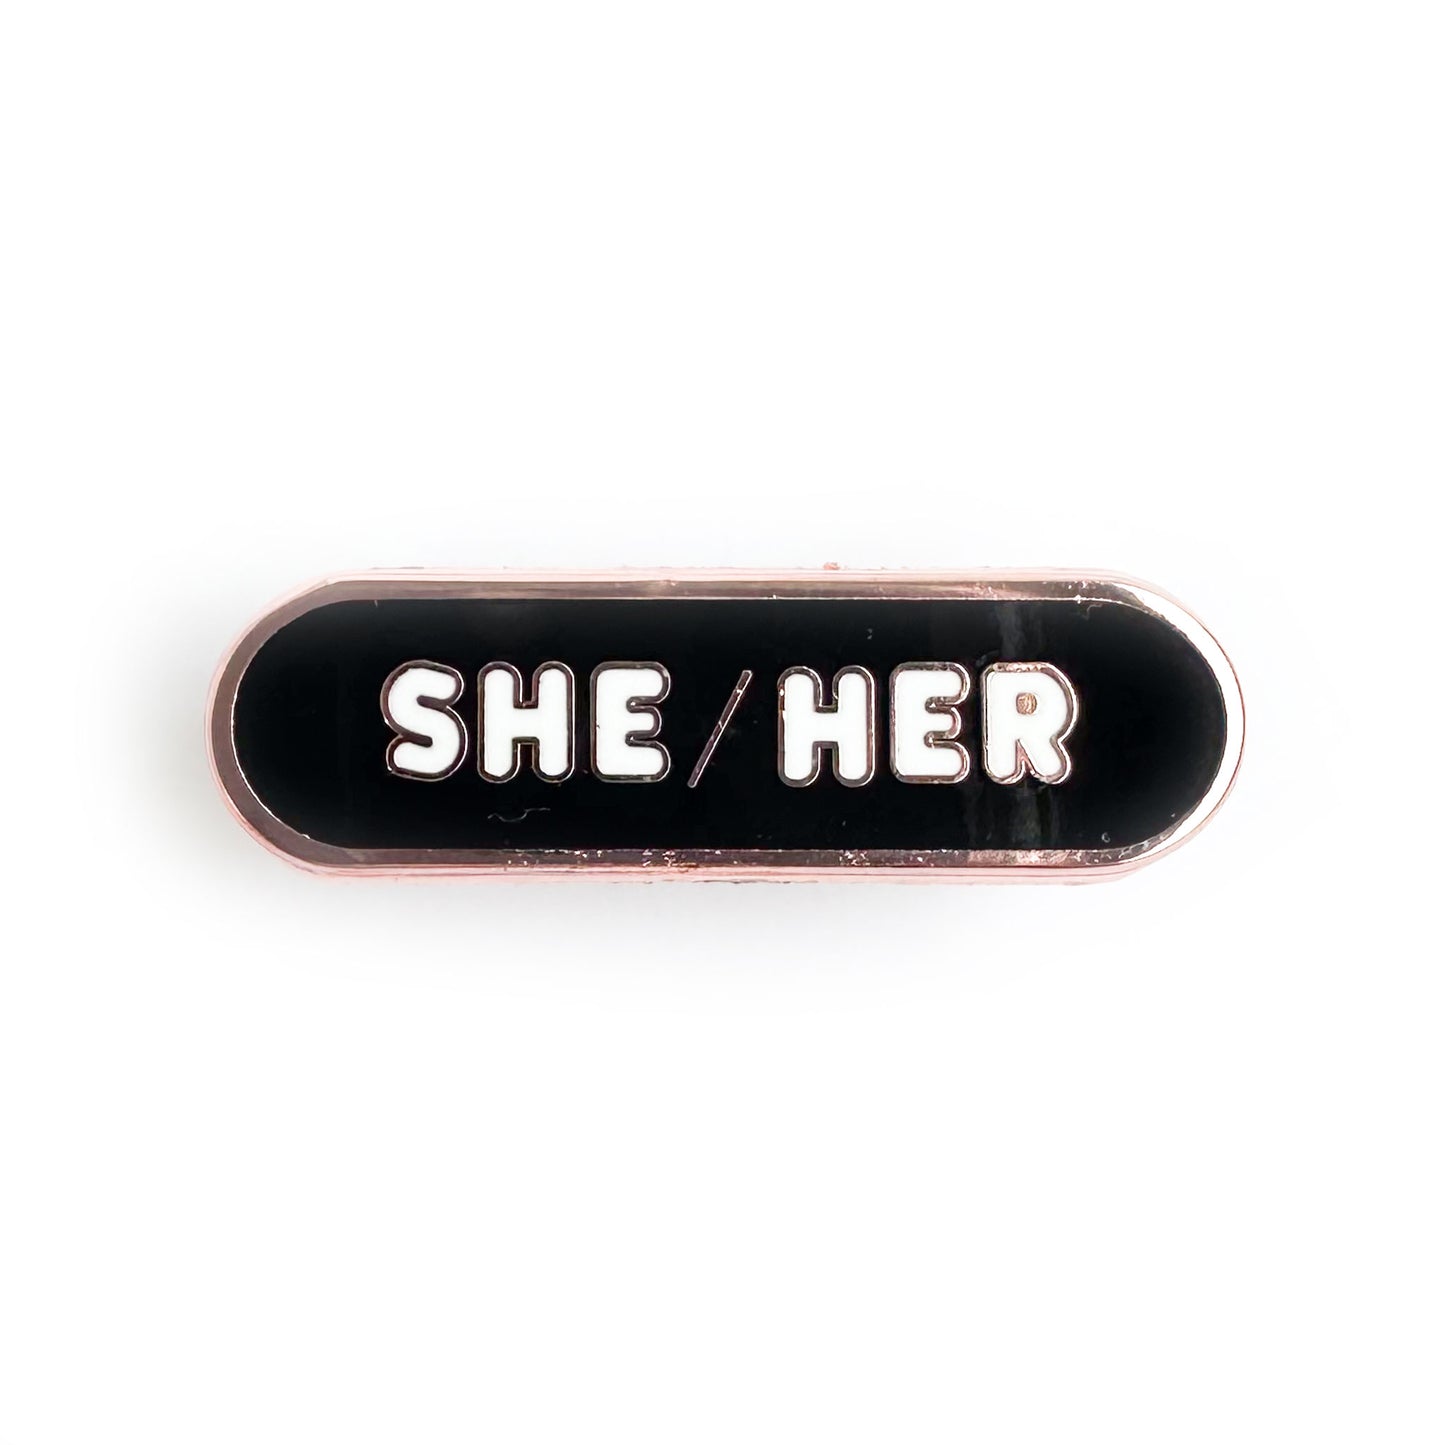 A capsule shaped pin with a black background and white letters that spell the pronouns "She/Her" on it. 